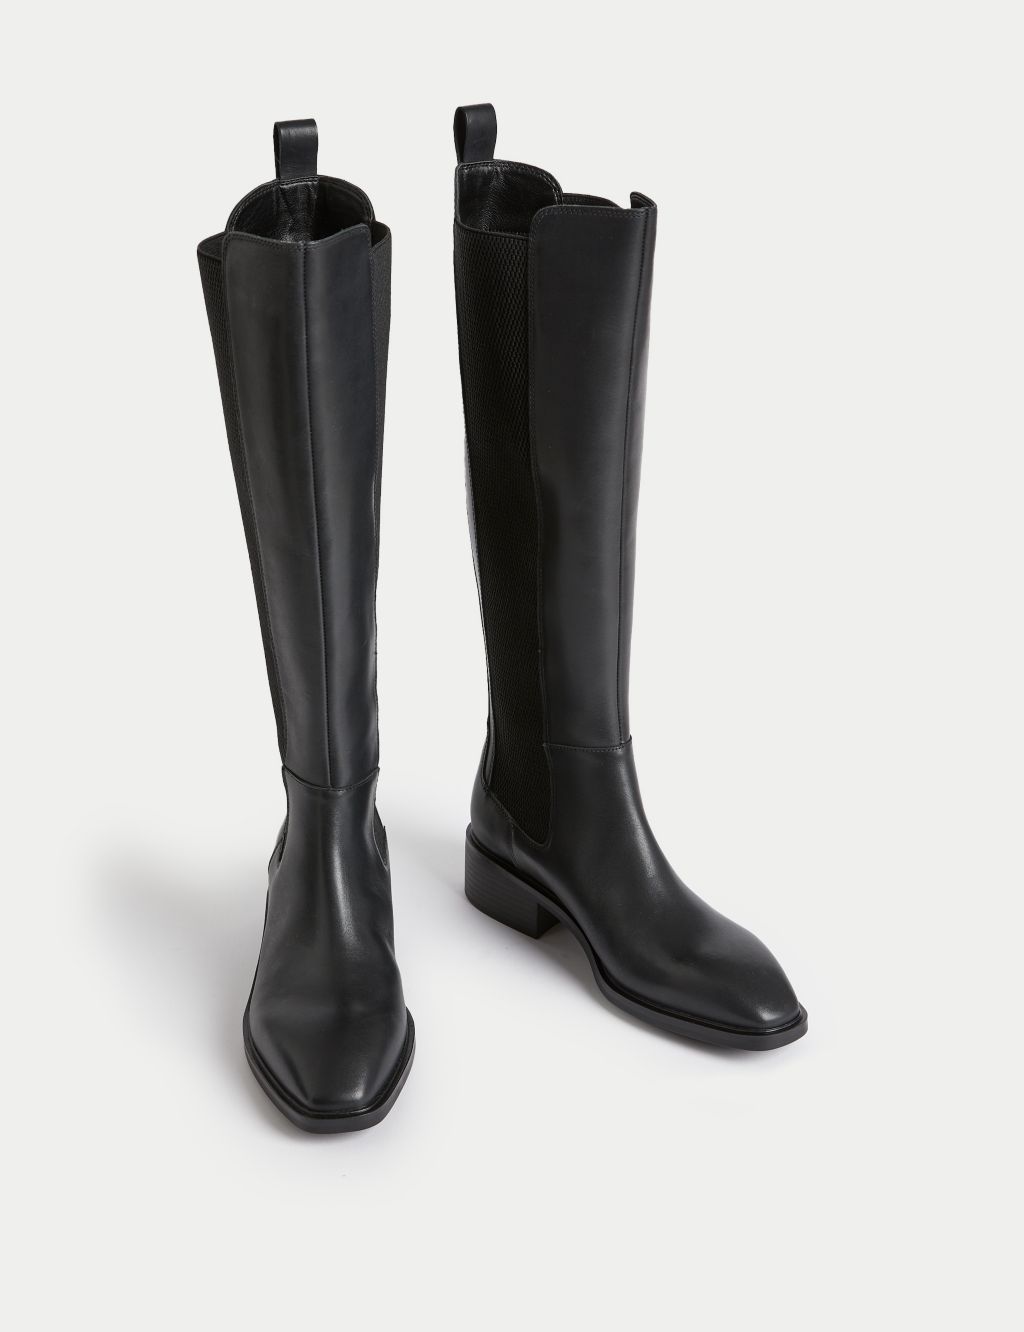 Leather Chelsea Flat Knee High Boots image 2